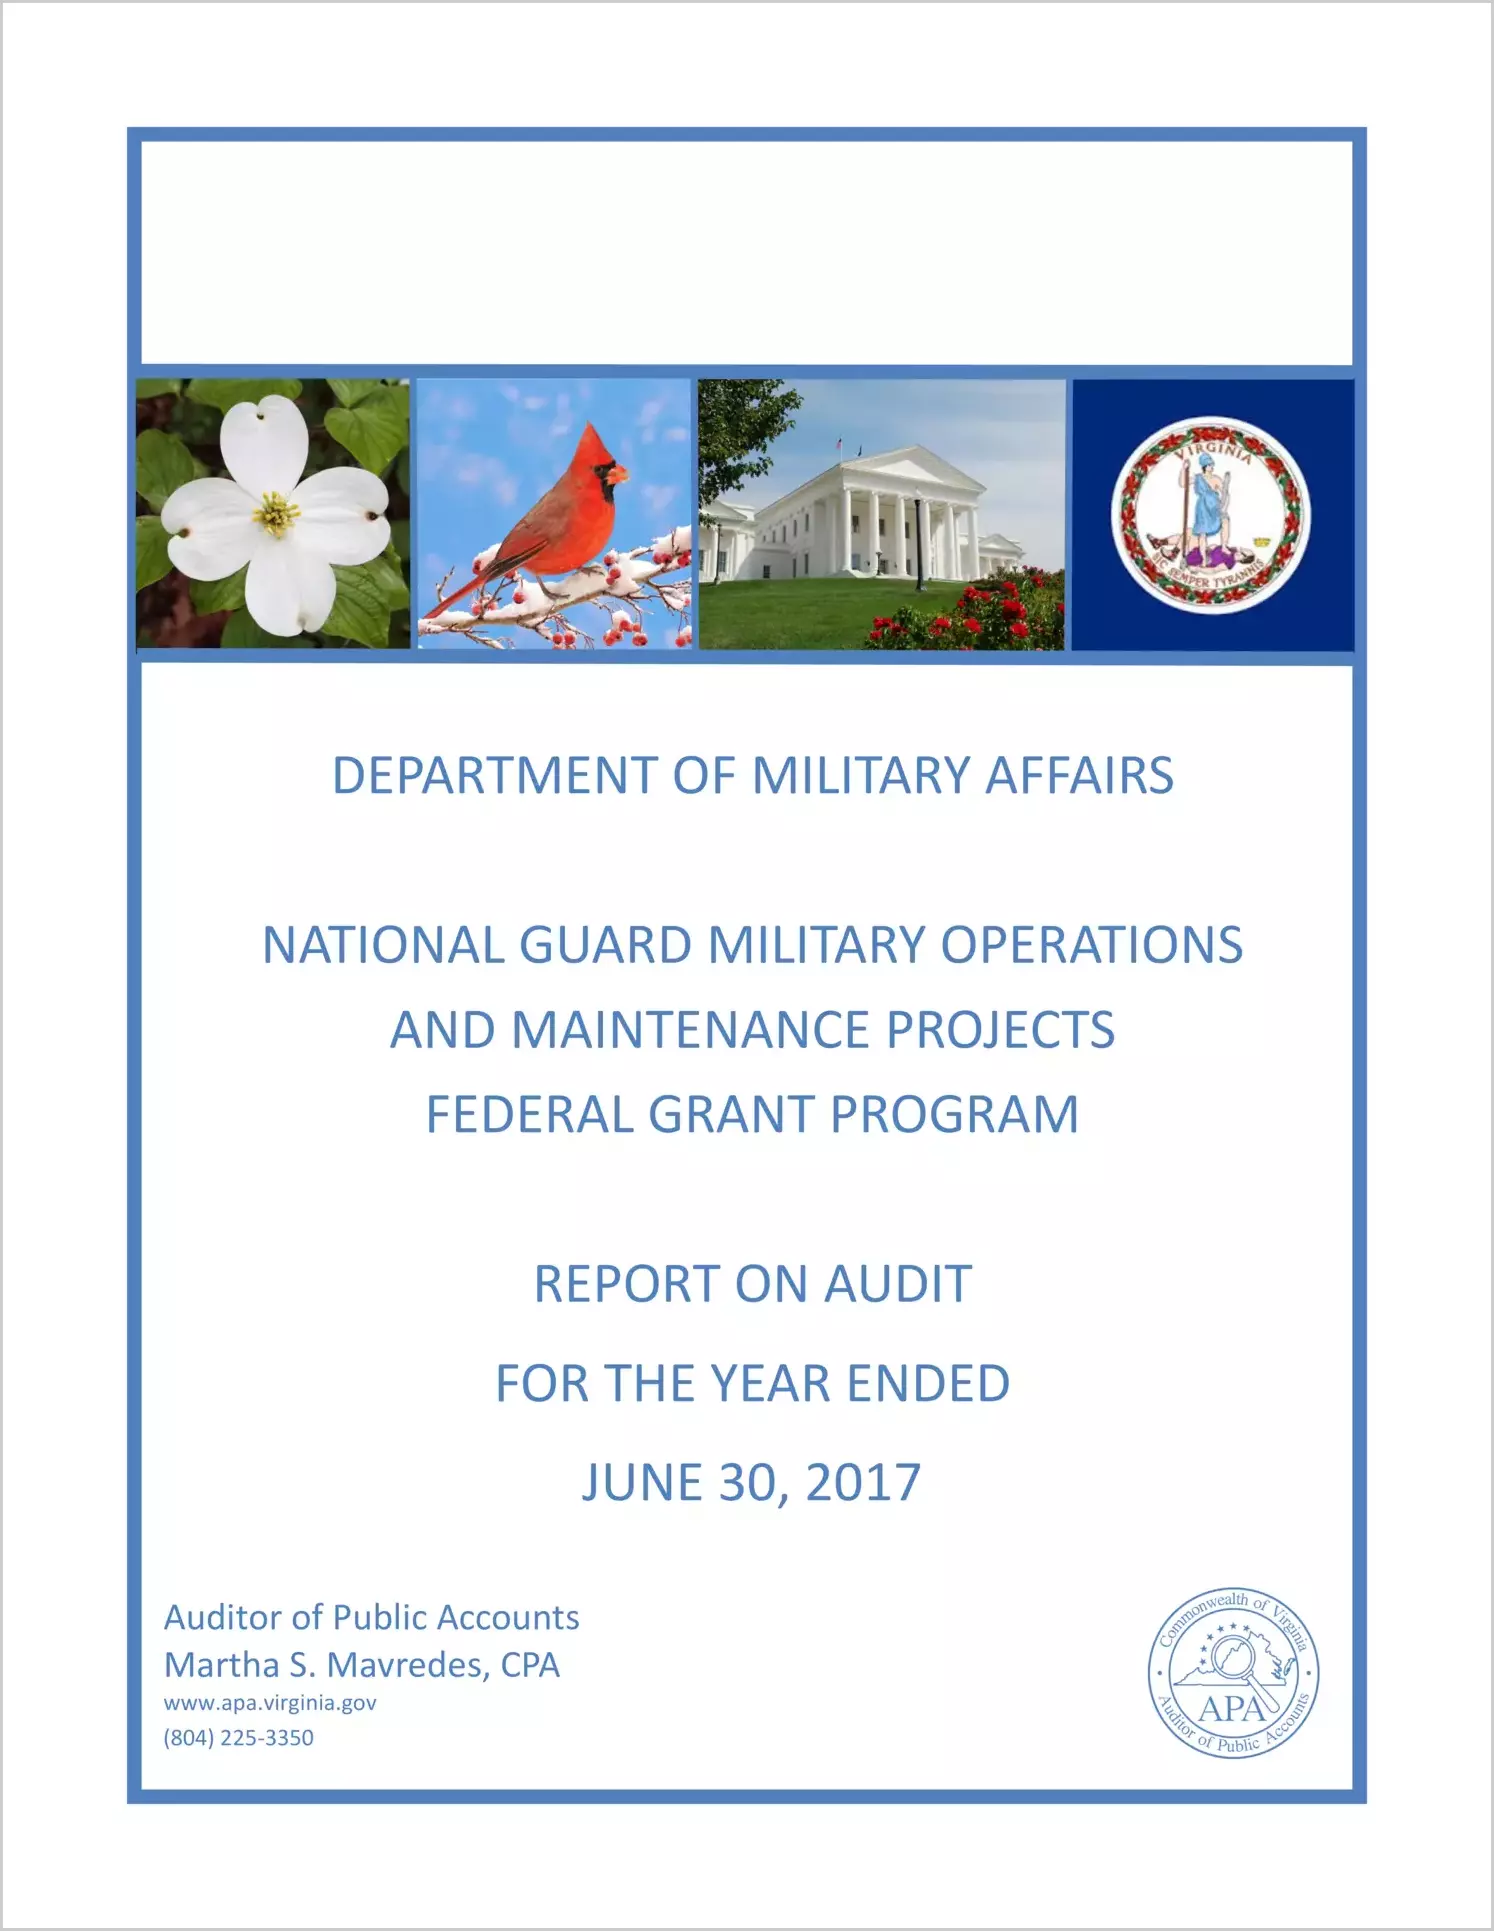 Department of Military Affairs - National Guard Military Operations and Maintenance Projects Federal Grant Program for the year ended June 30, 2017